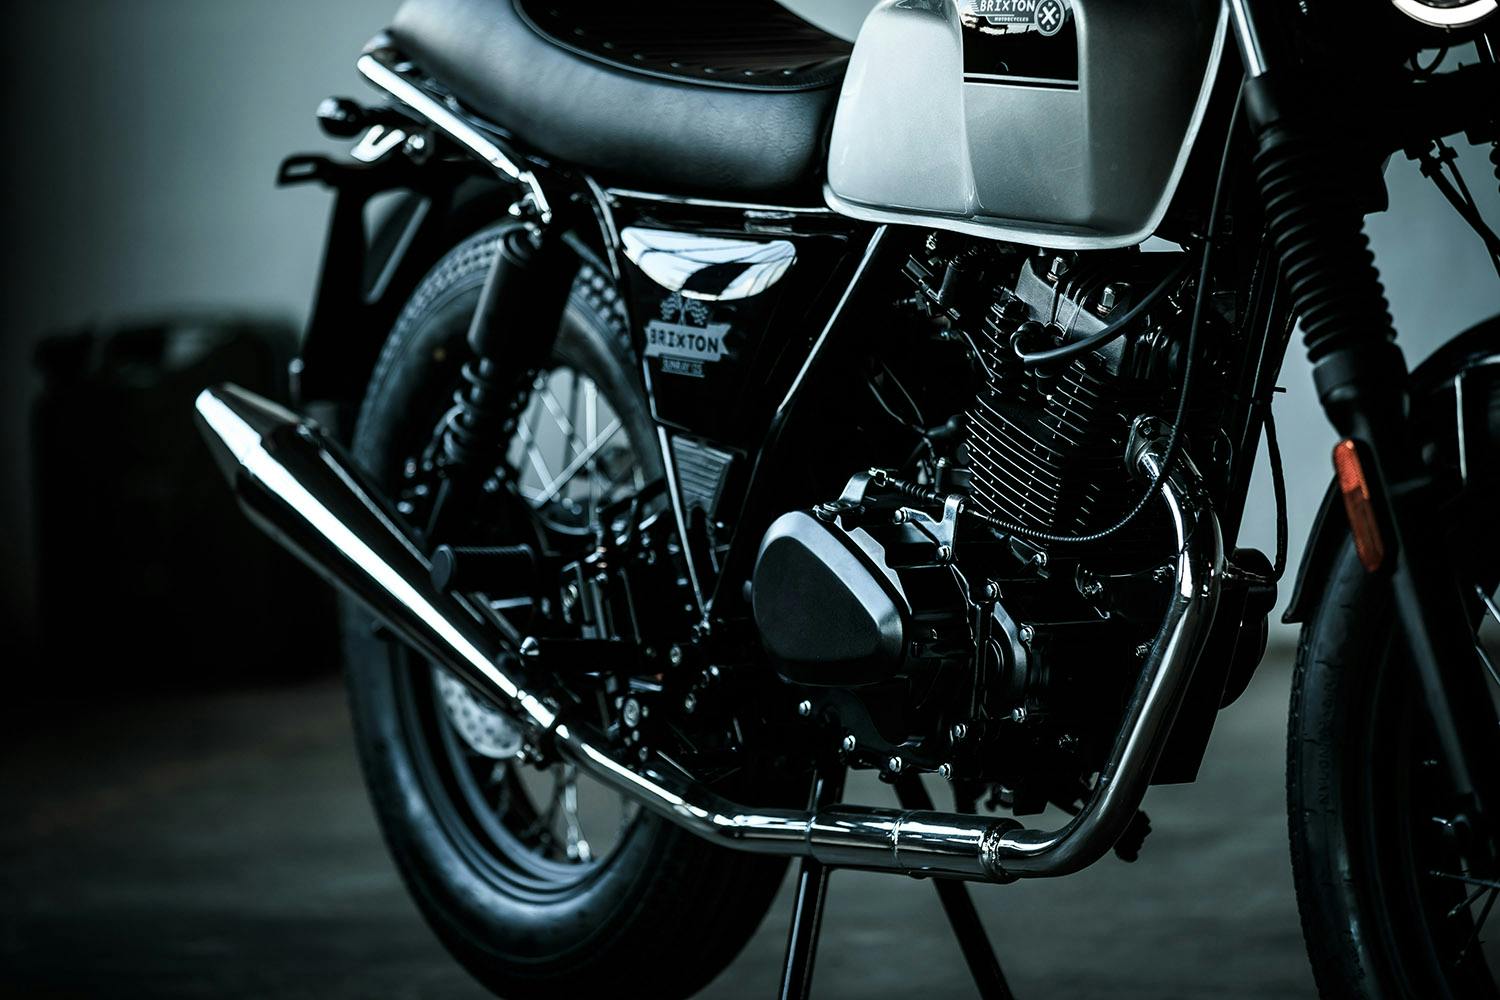 Cropped photo of the motor, exhaust and muffler of the Brixton Sunray 125 in Bullet Silver